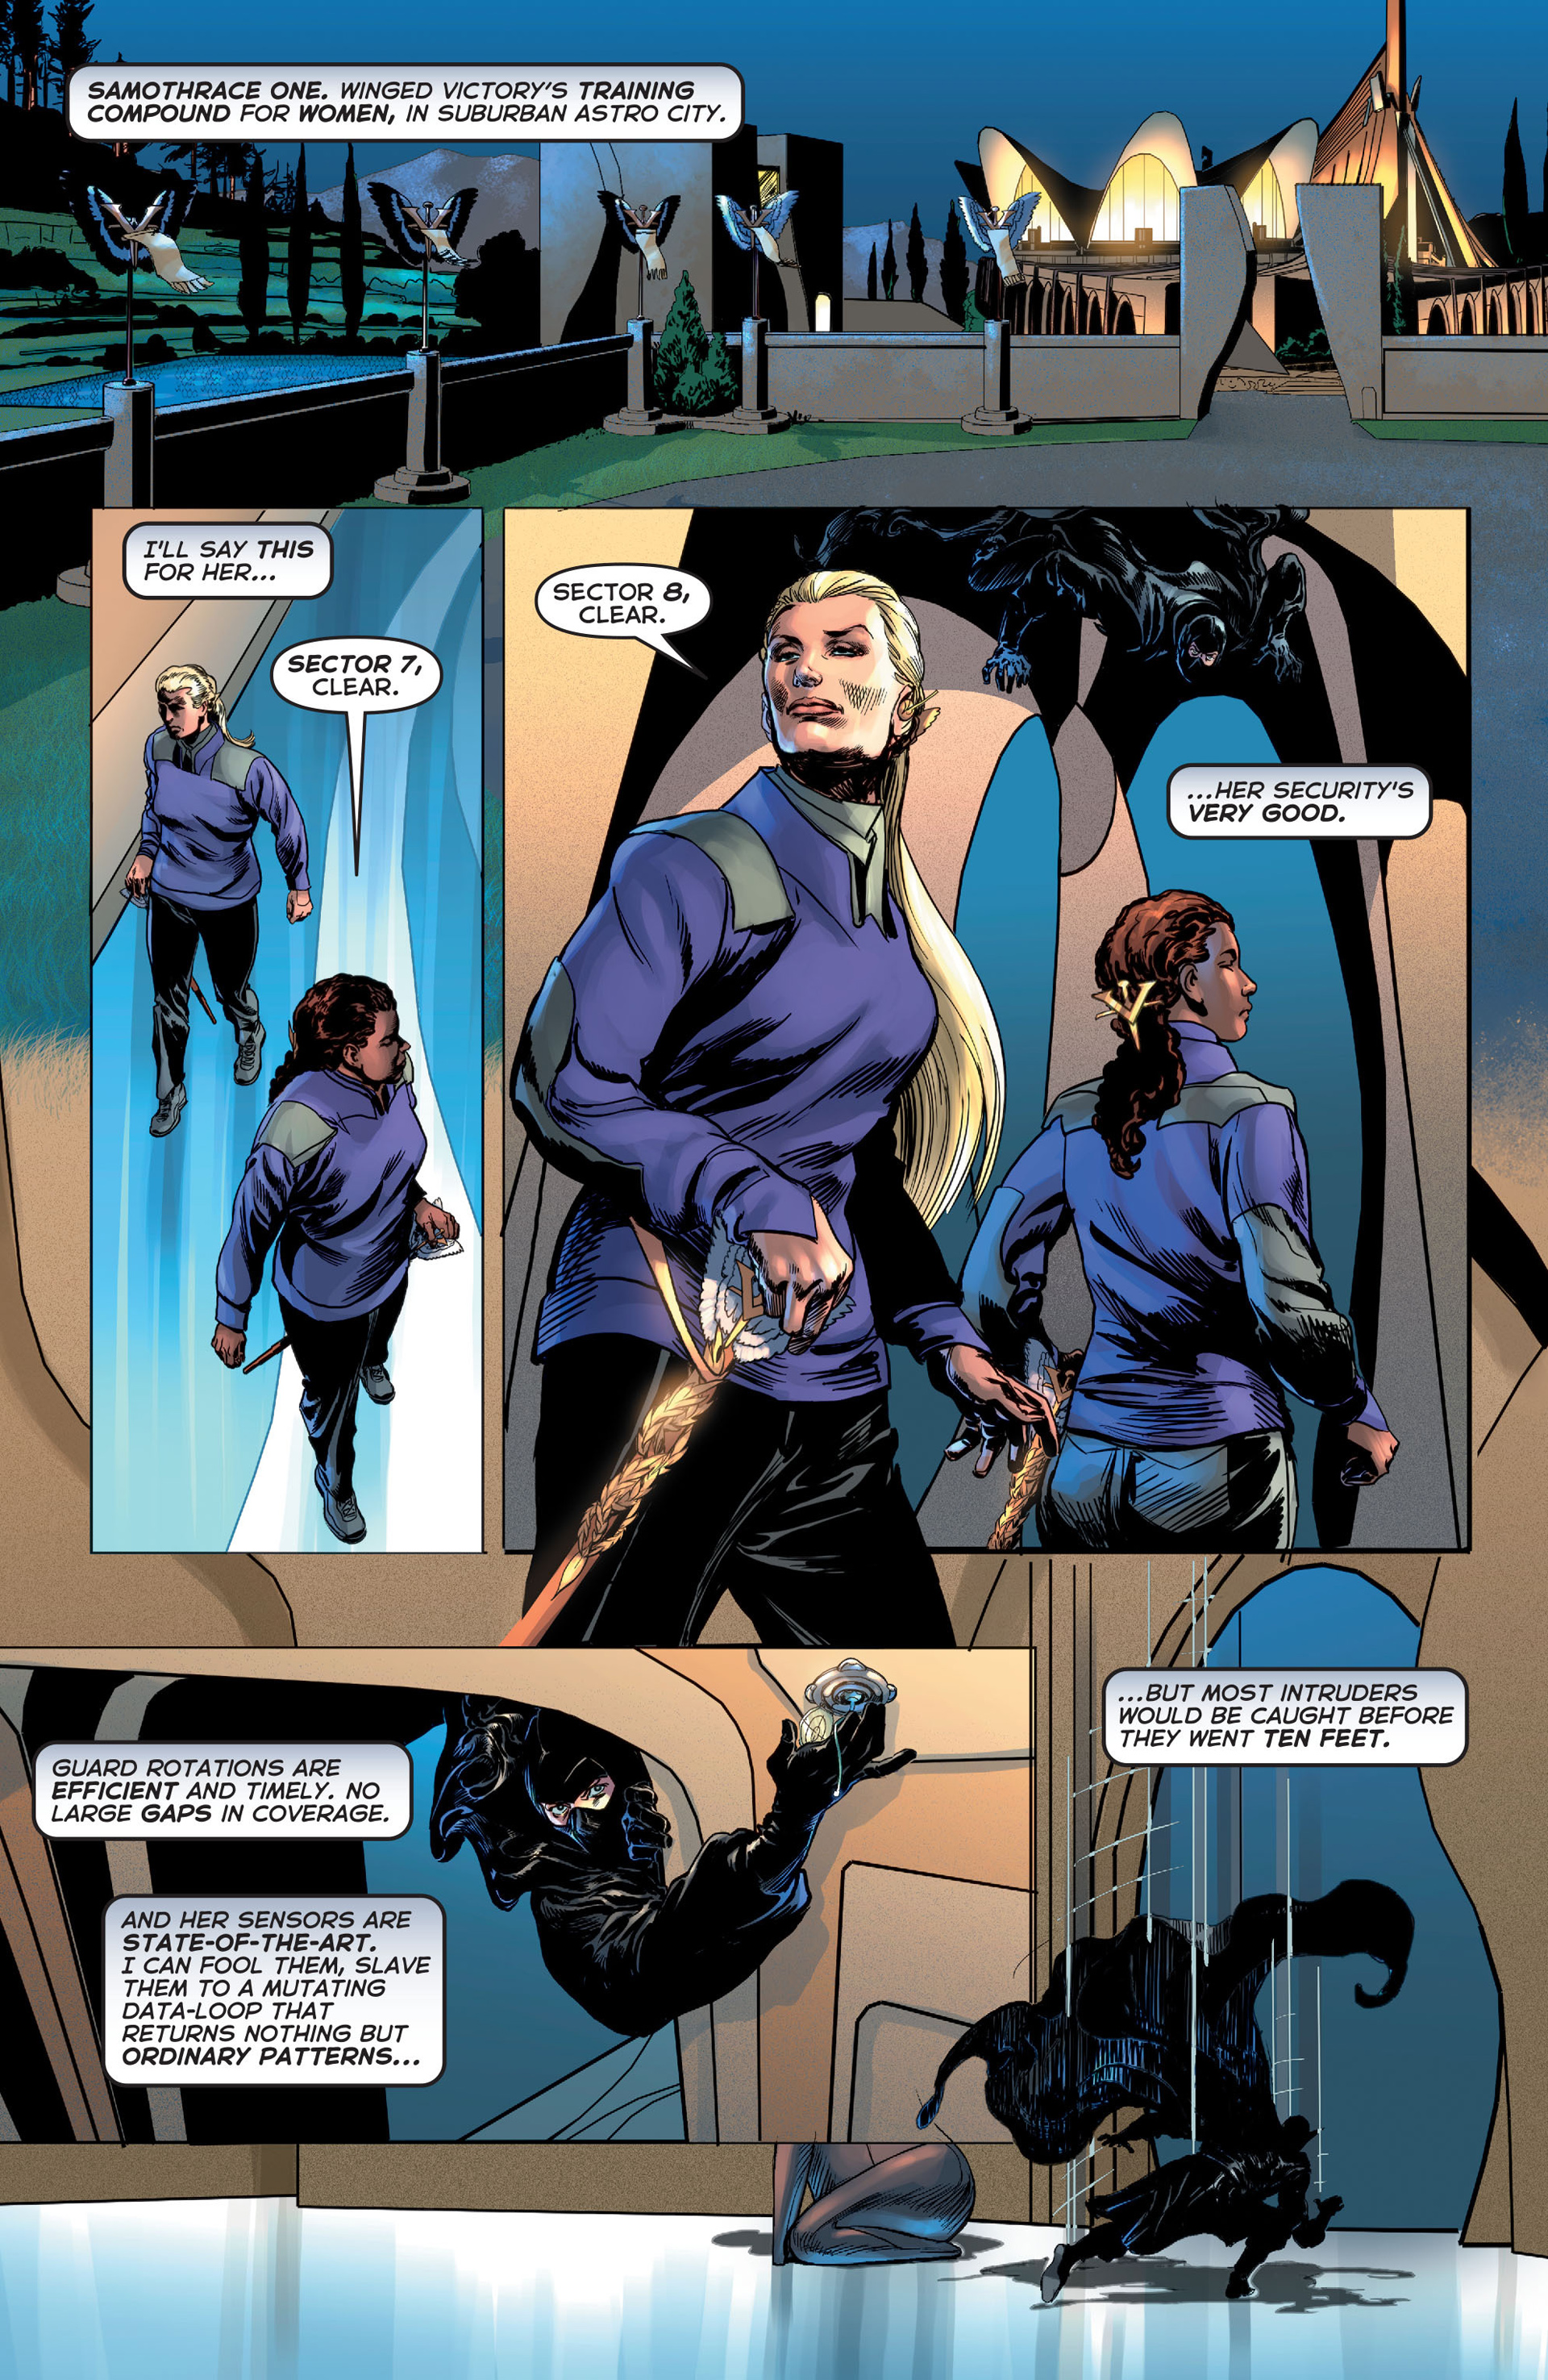 Astro City (2013-): Chapter 8 - Page 2